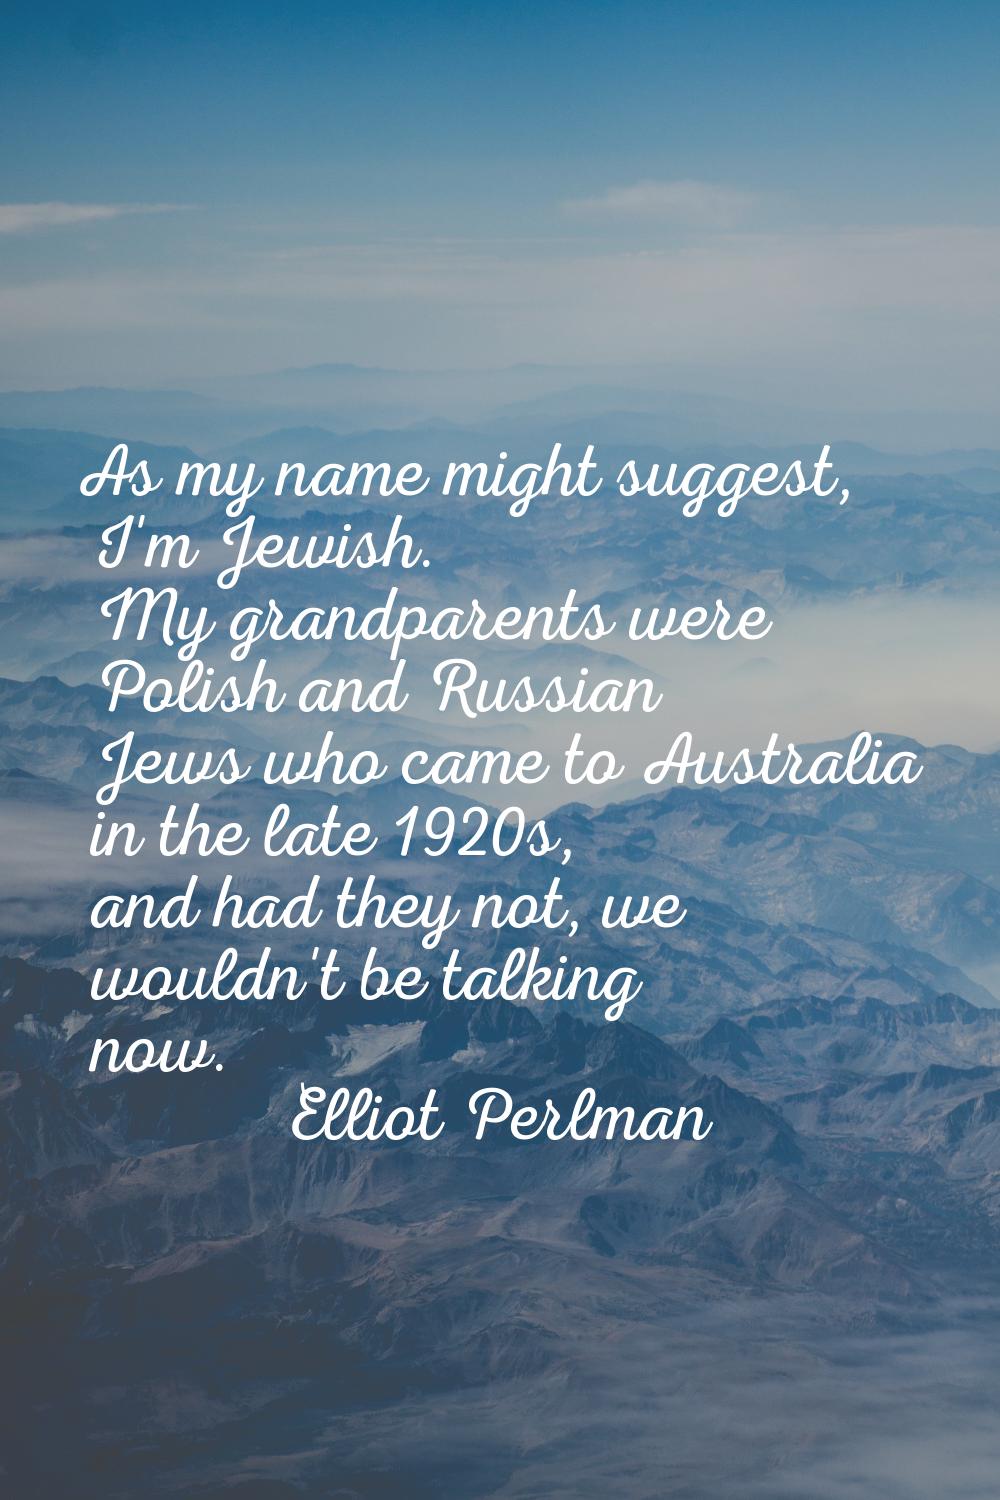 As my name might suggest, I'm Jewish. My grandparents were Polish and Russian Jews who came to Aust